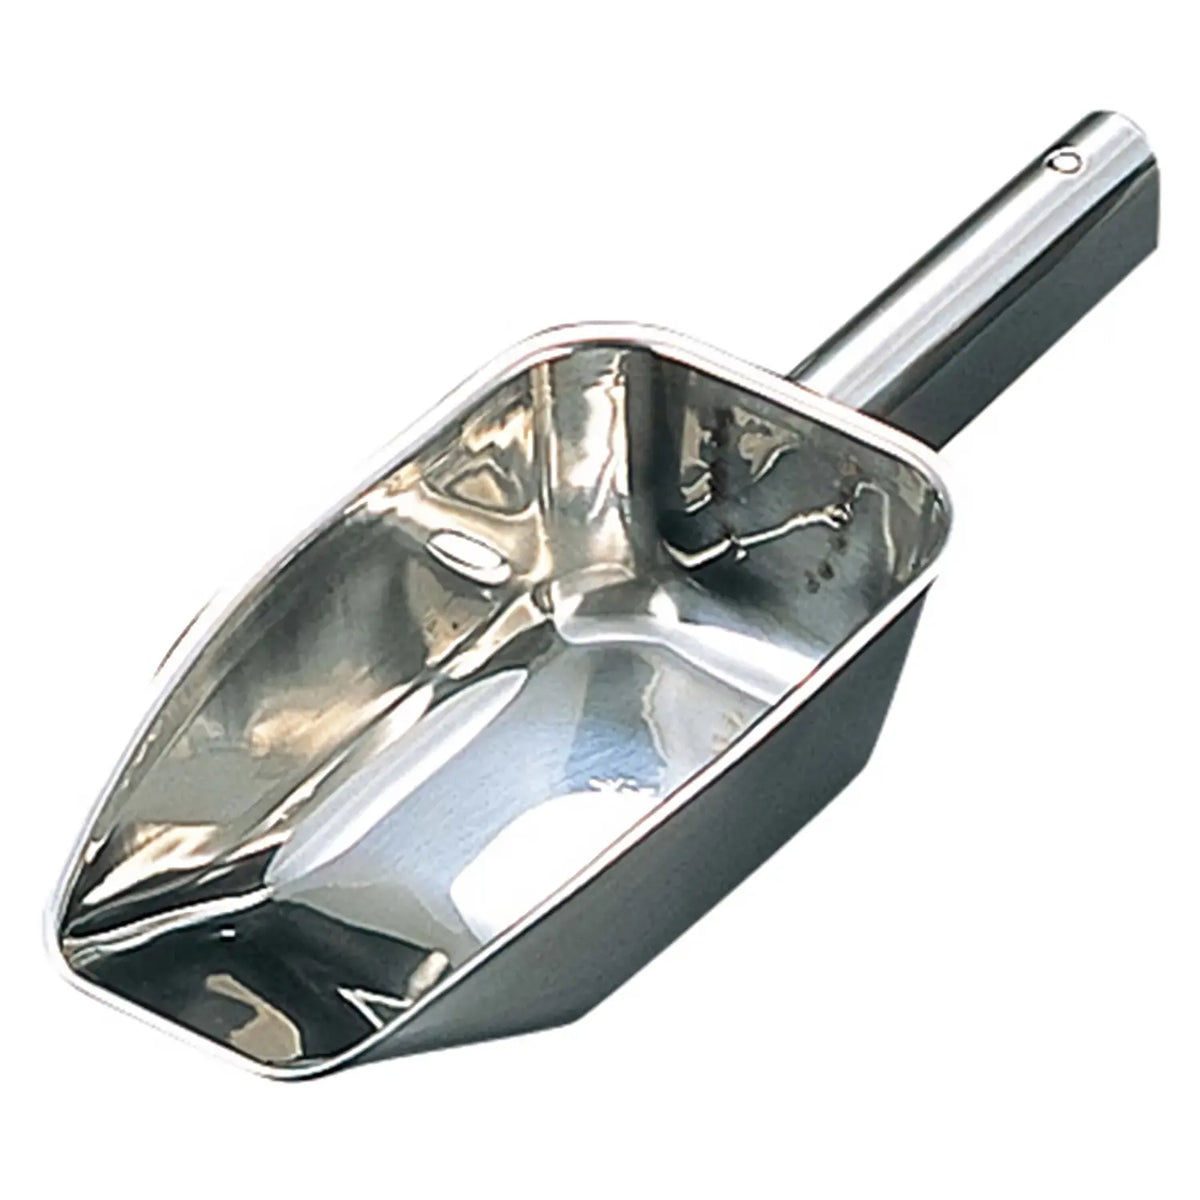 WADASUKE Stainless Steel Ice Scoop for Water Pitcher